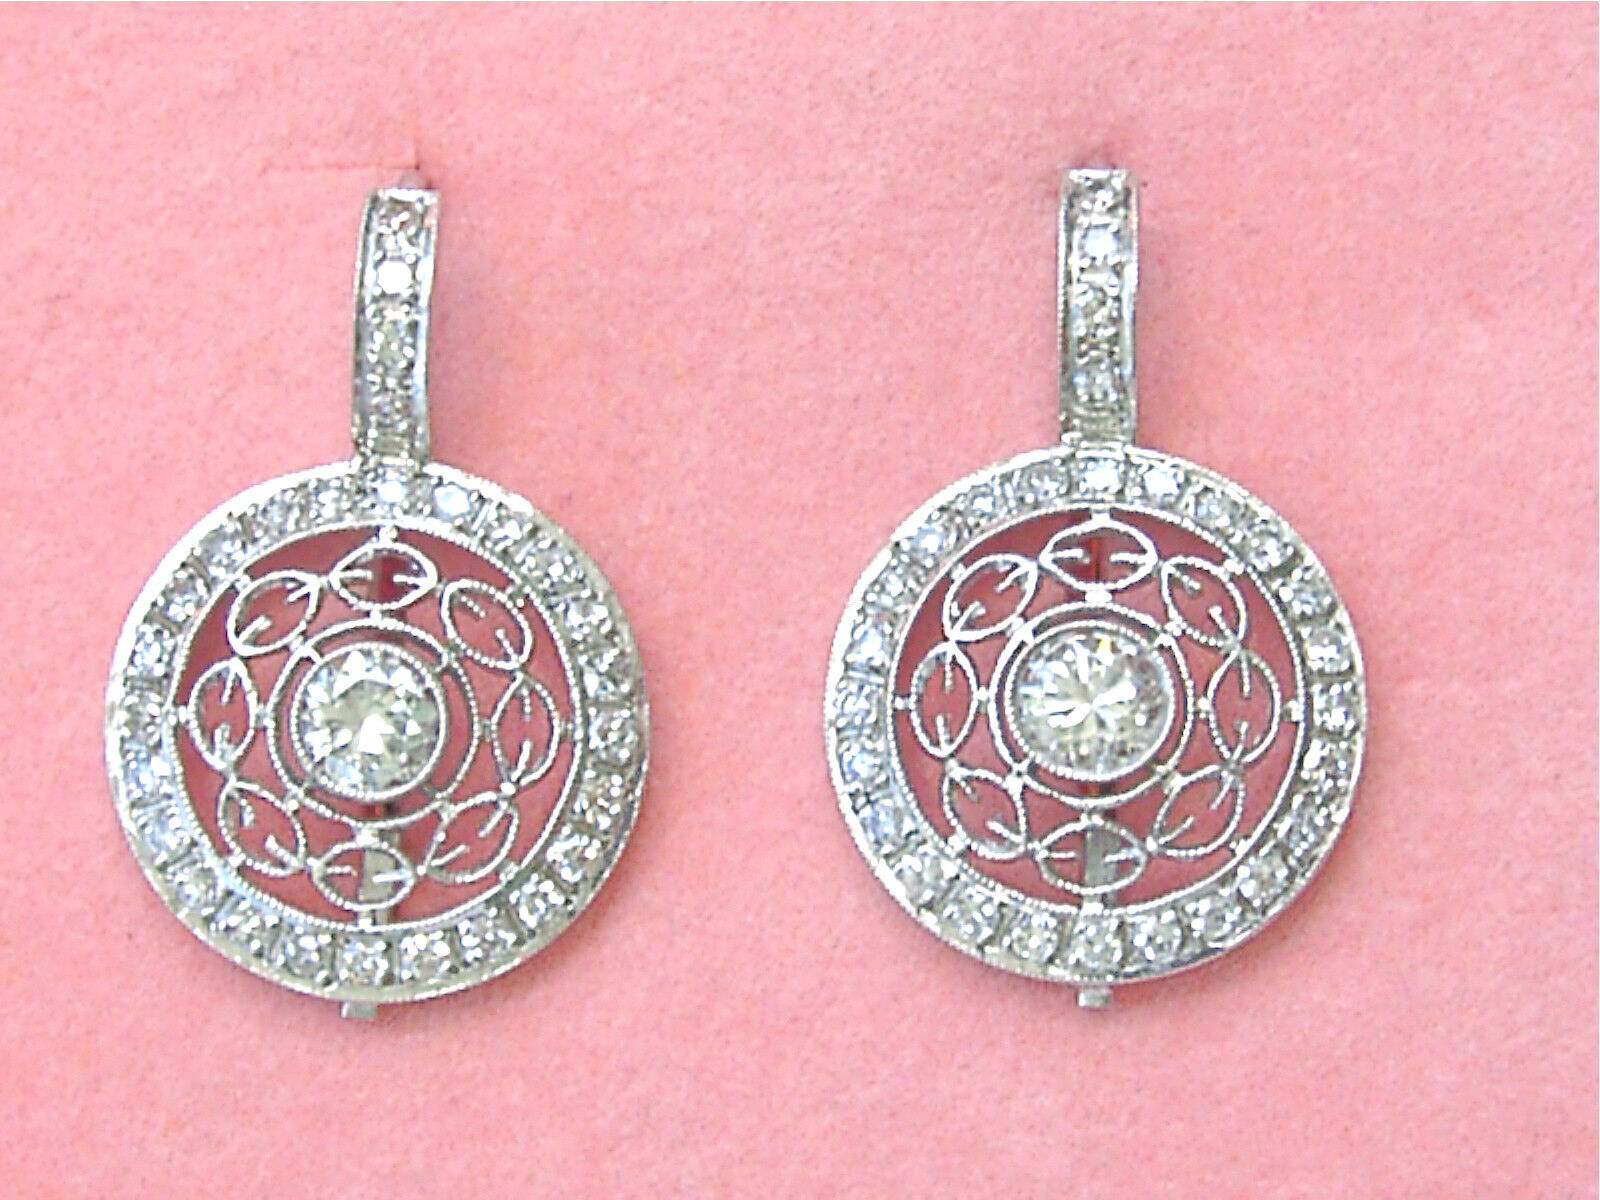 Primary image for ESTATE EDWARDIAN STYLE 1.92 ctw DIAMOND PLATINUM COCKTAIL 1" EVERYDAY EARRINGS